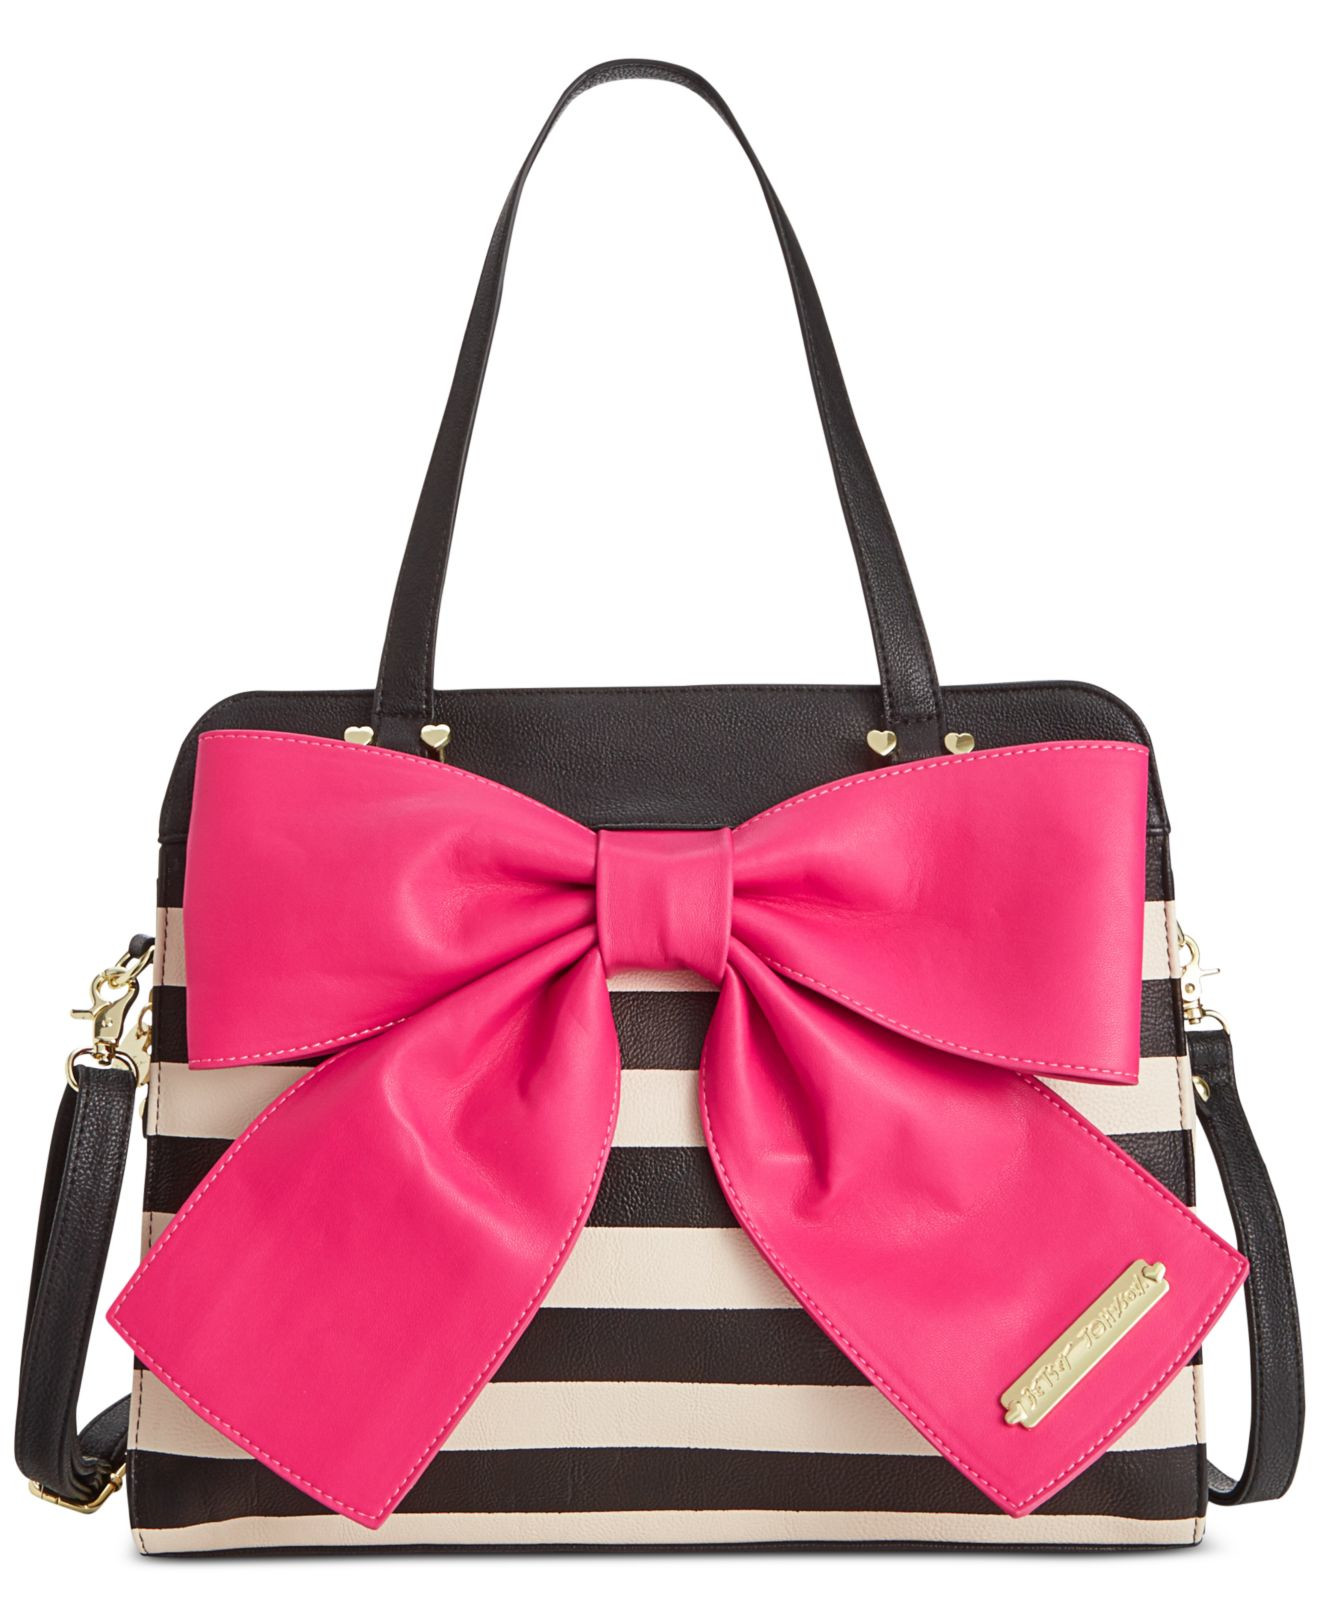 Betsey Johnson Bow Tote in Pink - Lyst